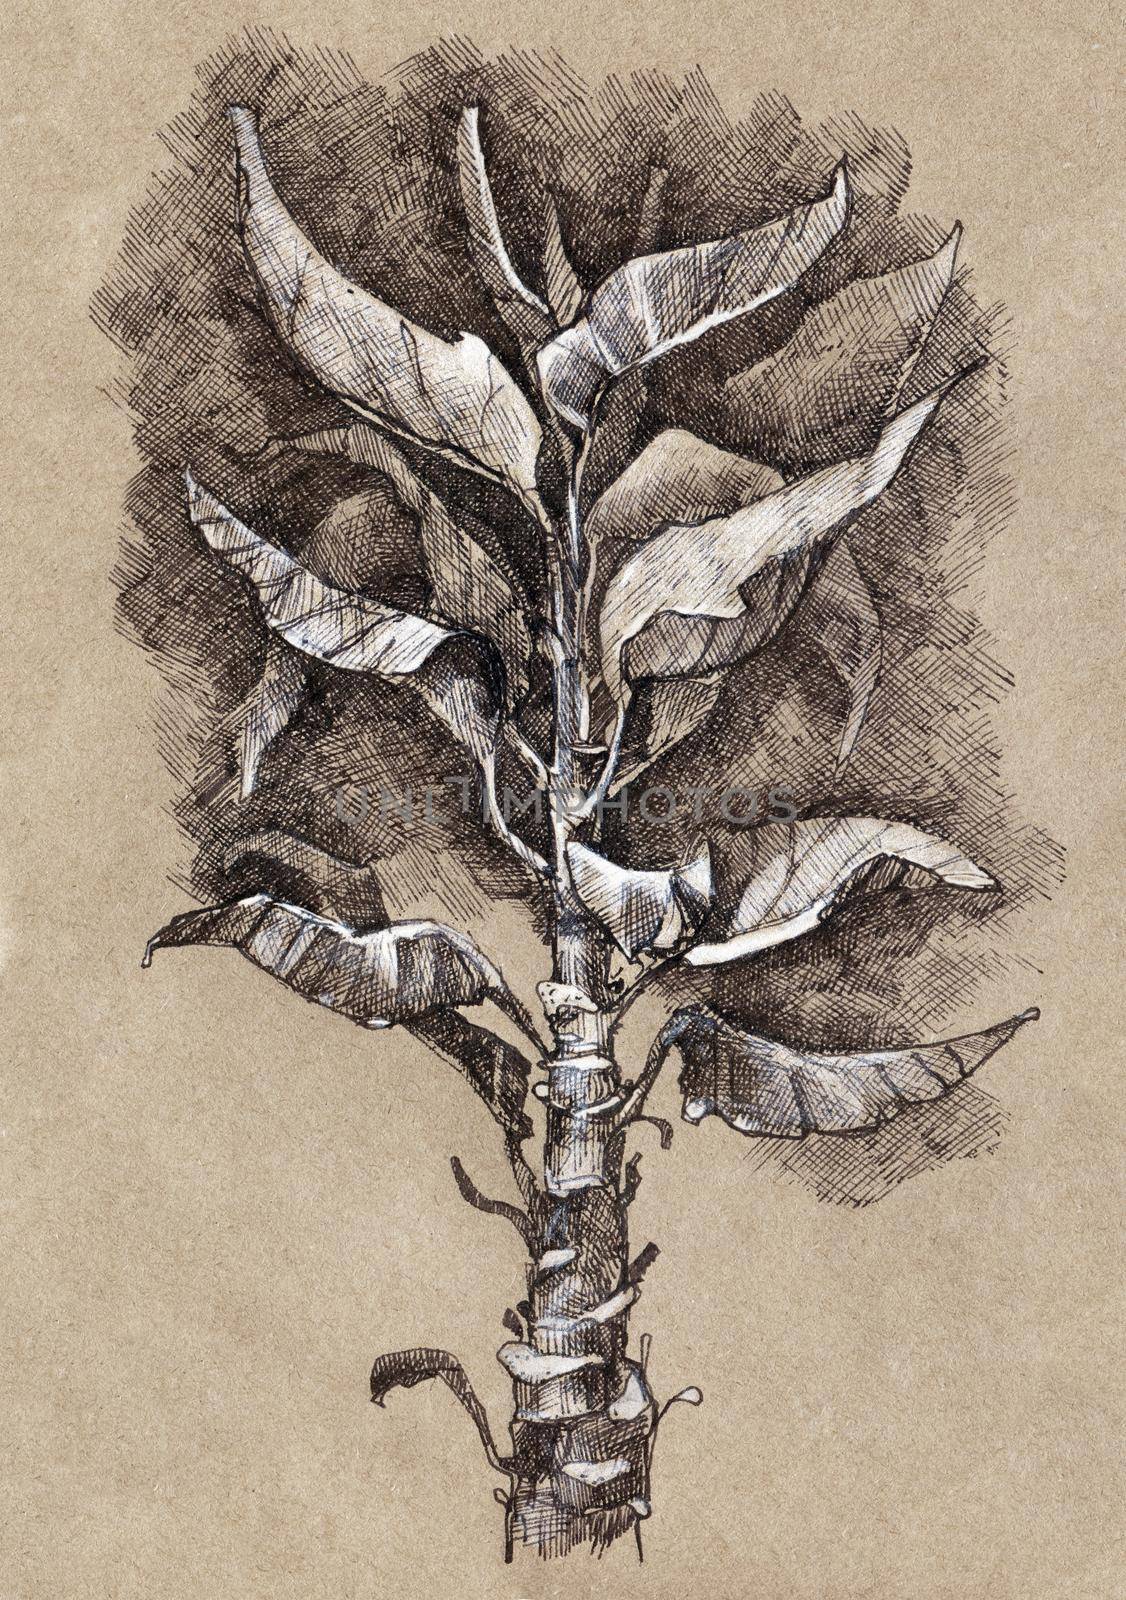 Artistic sketch of home plant - ink and pencil drawing on craft paper